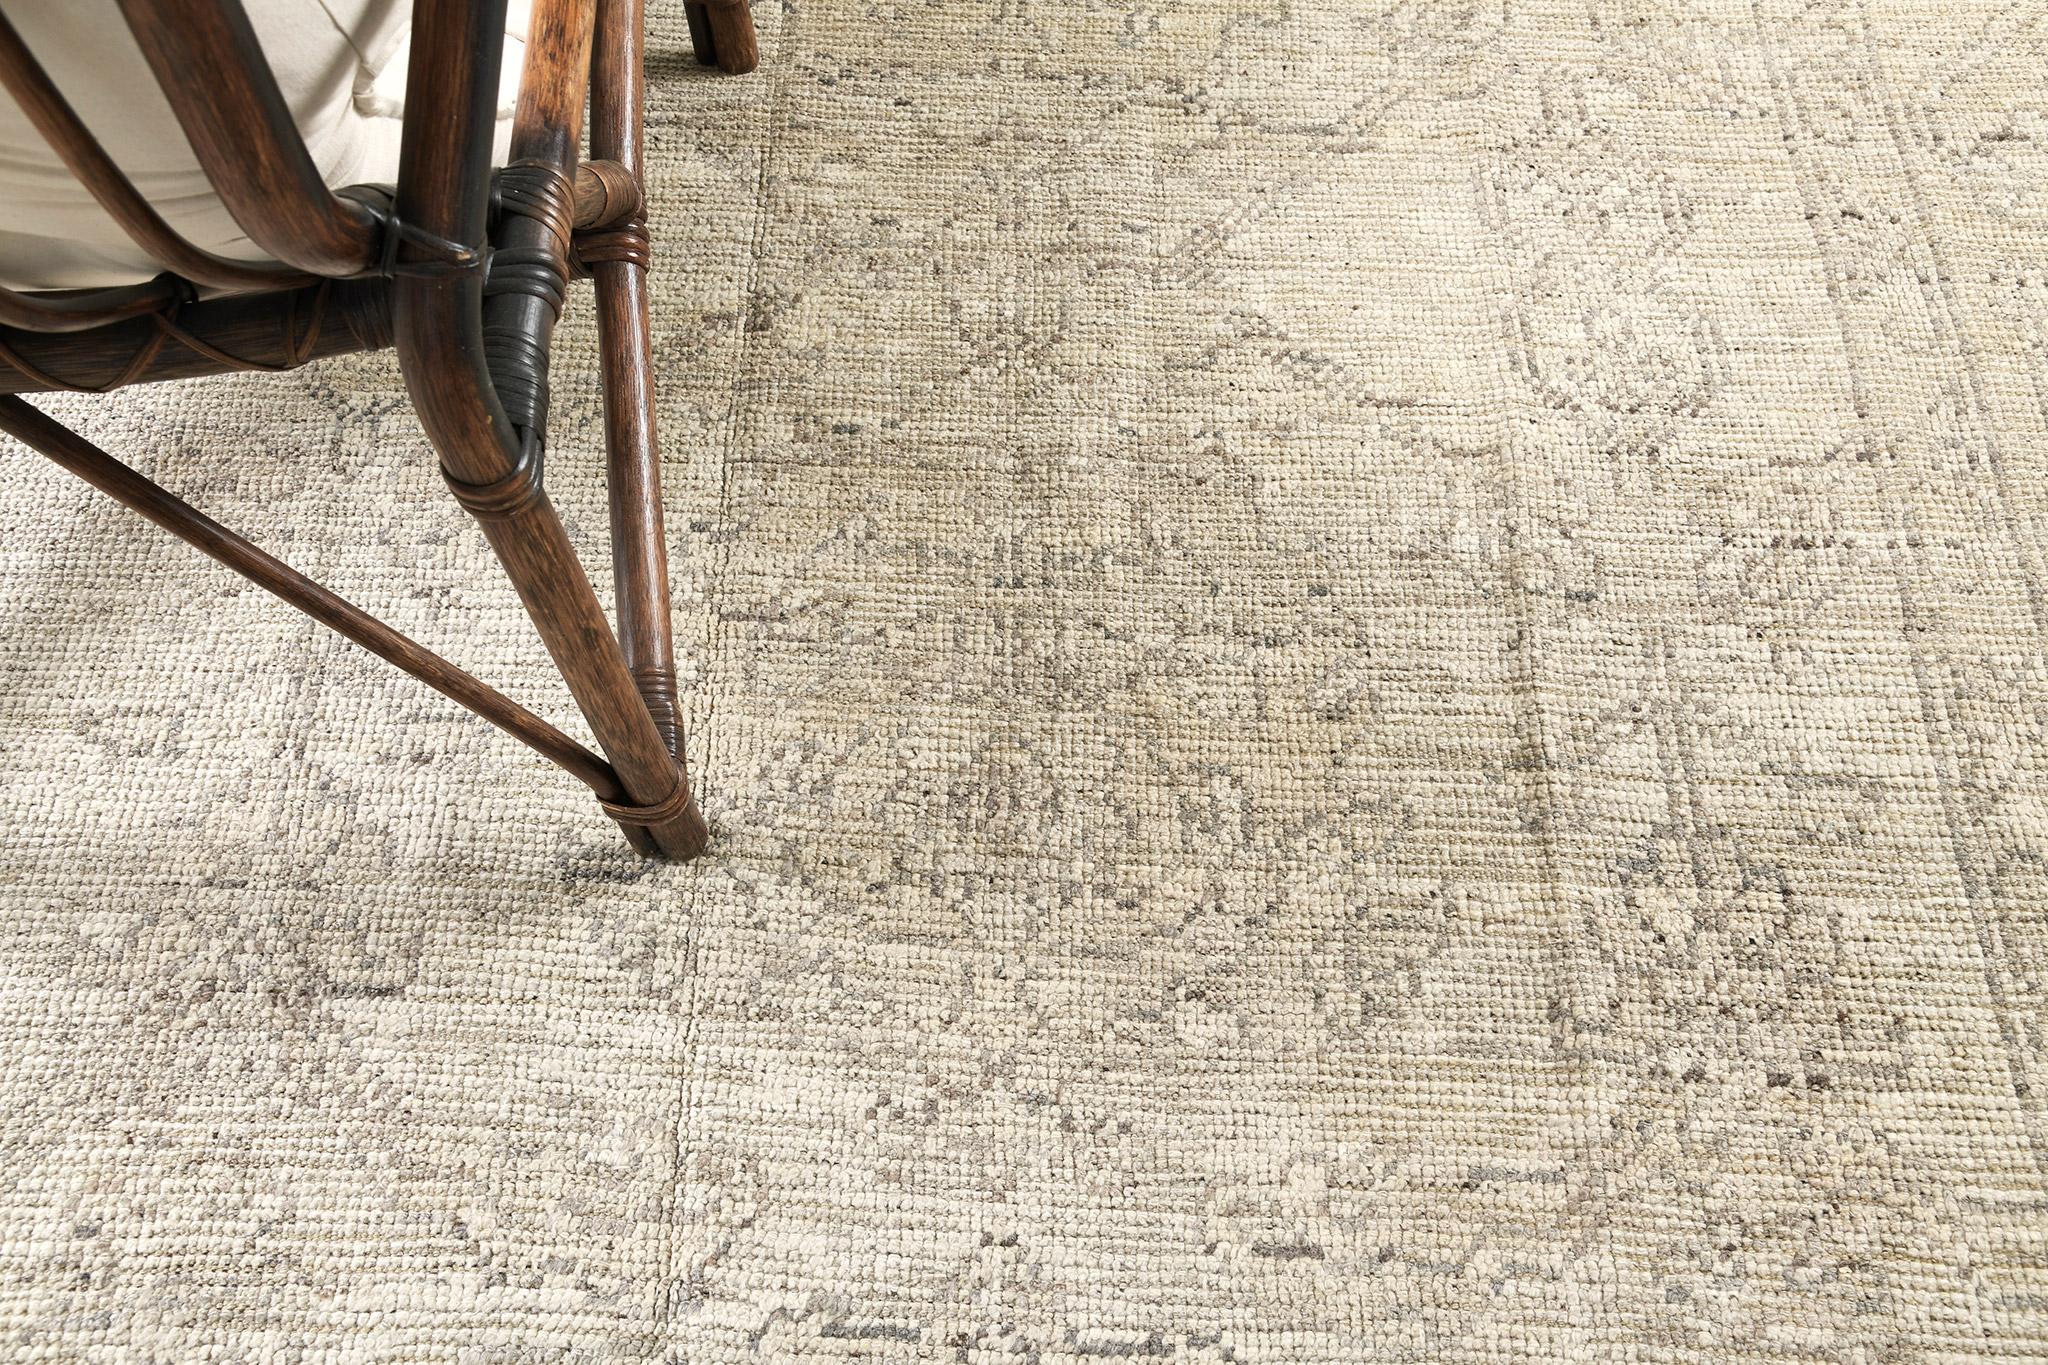 A phenomenal Oushak design revival rug that has an intricate and timeless pattern. Featuring the collaboration of muted tones of taupe and charcoal , this bewildering rug is composed with enchanting graceful iris and florid elements that create a